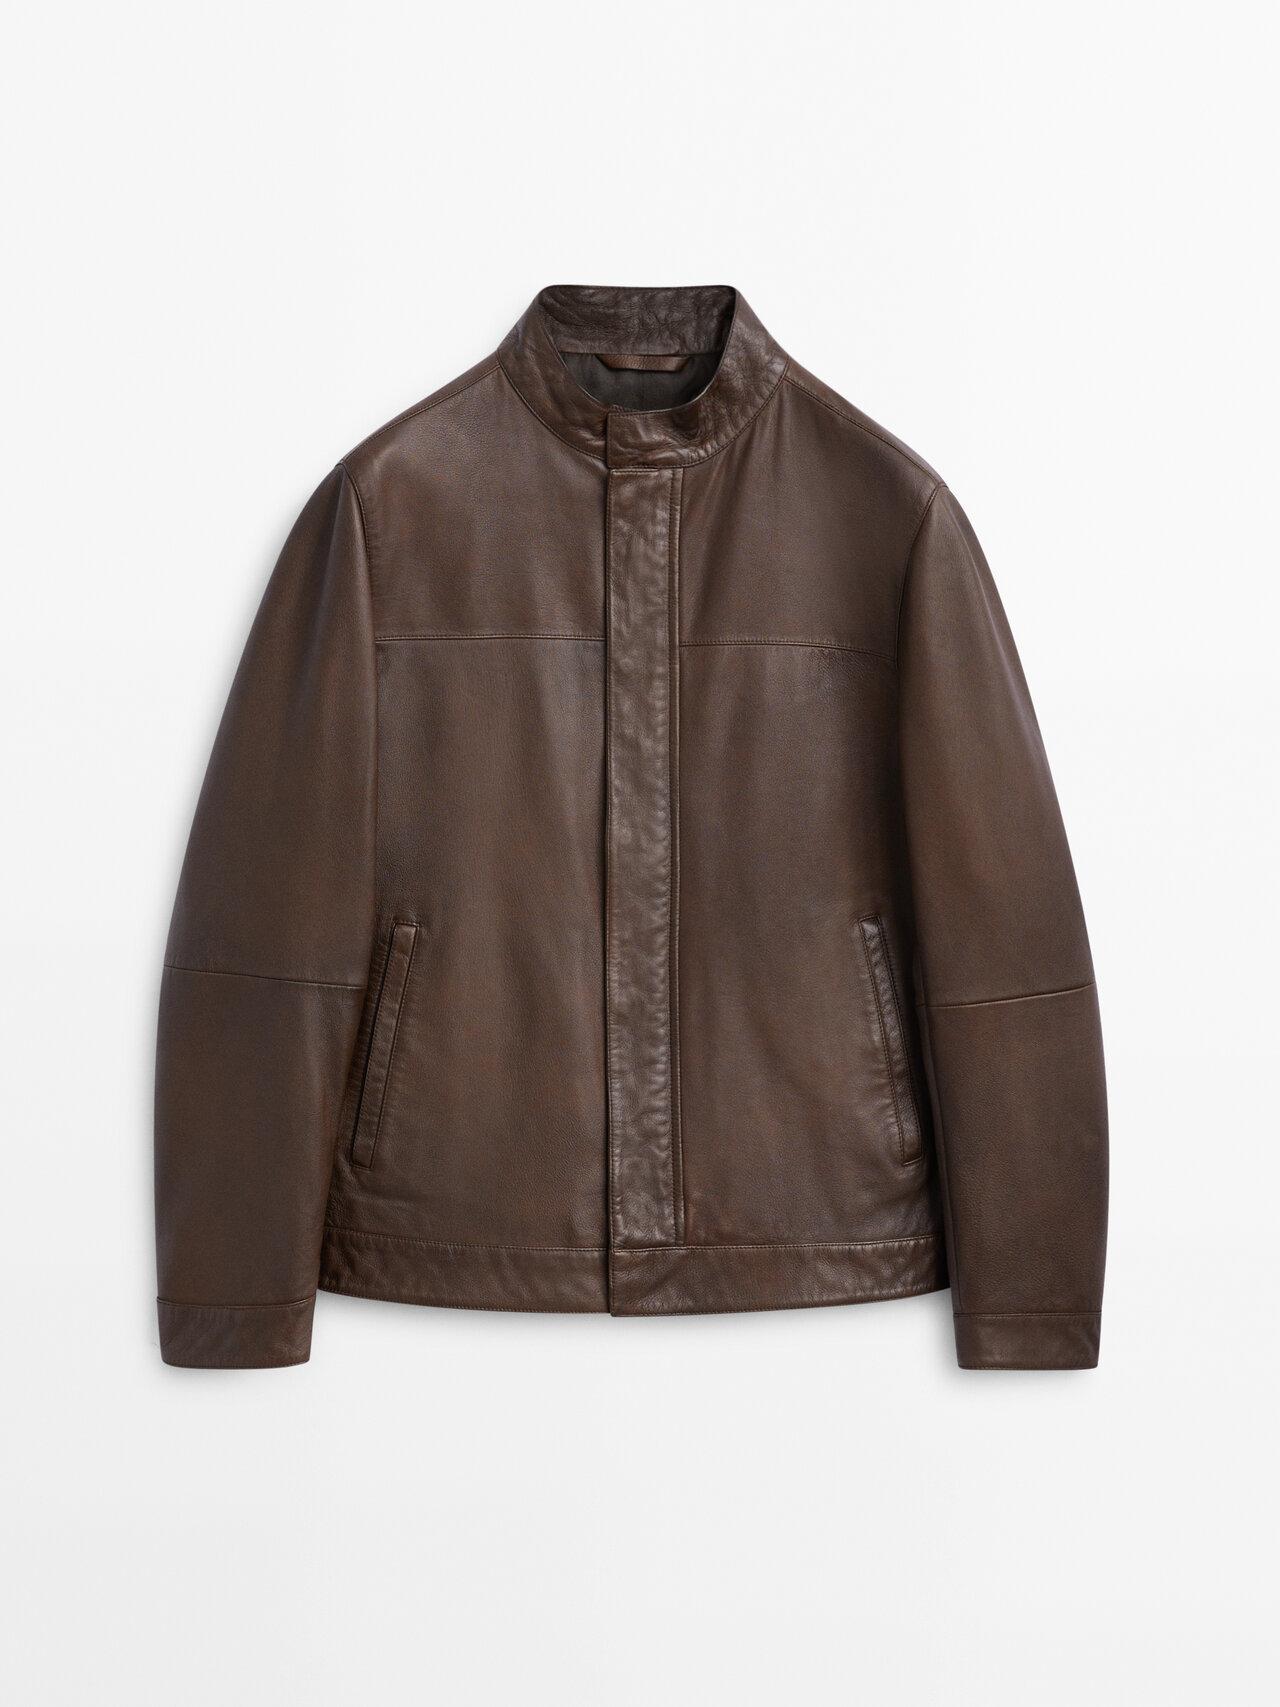 MASSIMO DUTTI Brown Nappa Leather Jacket for Men | Lyst